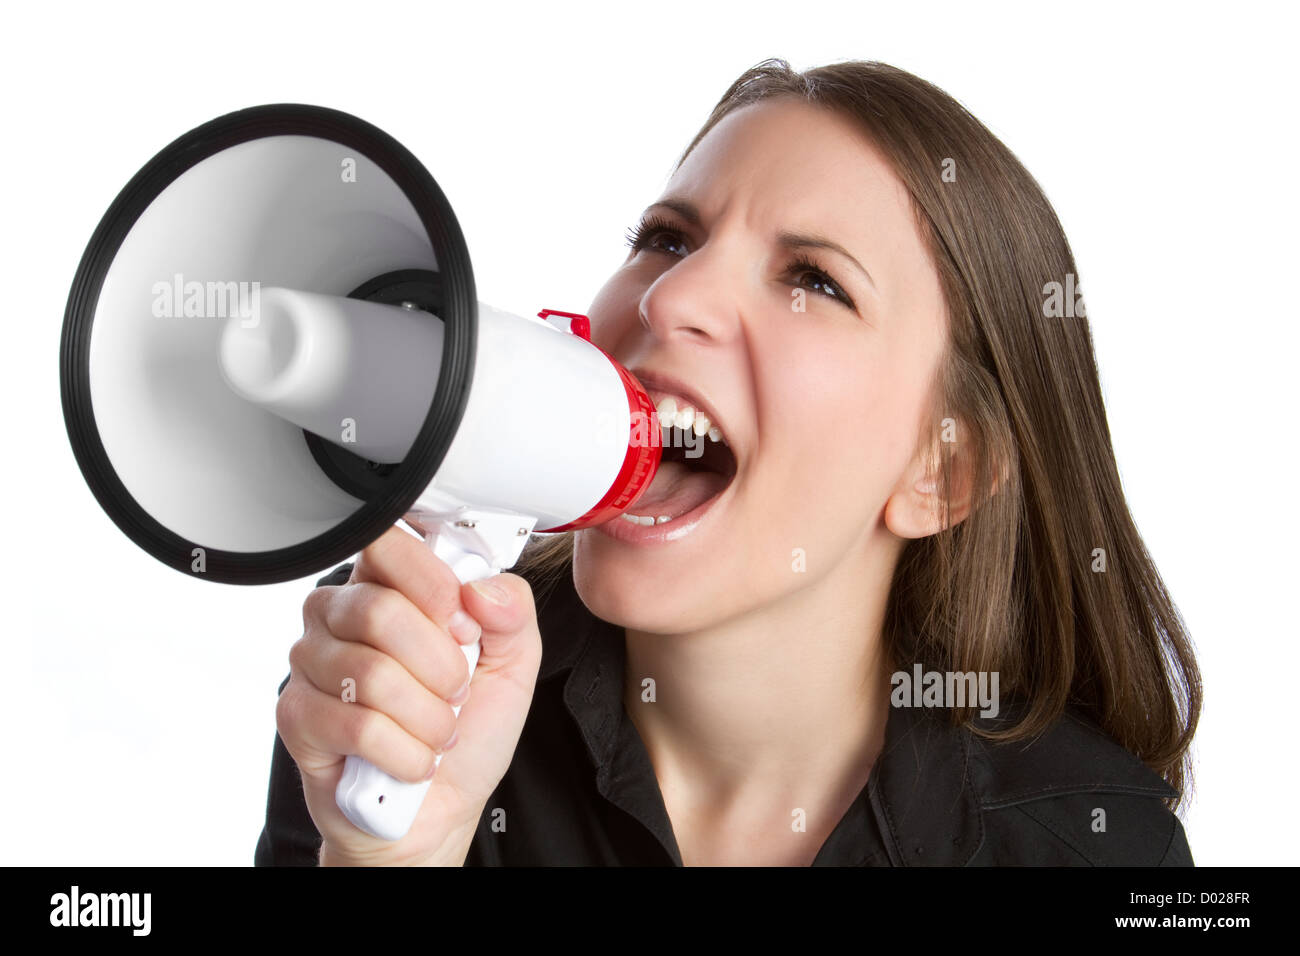 Angry woman yelling into megaphone Banque D'Images